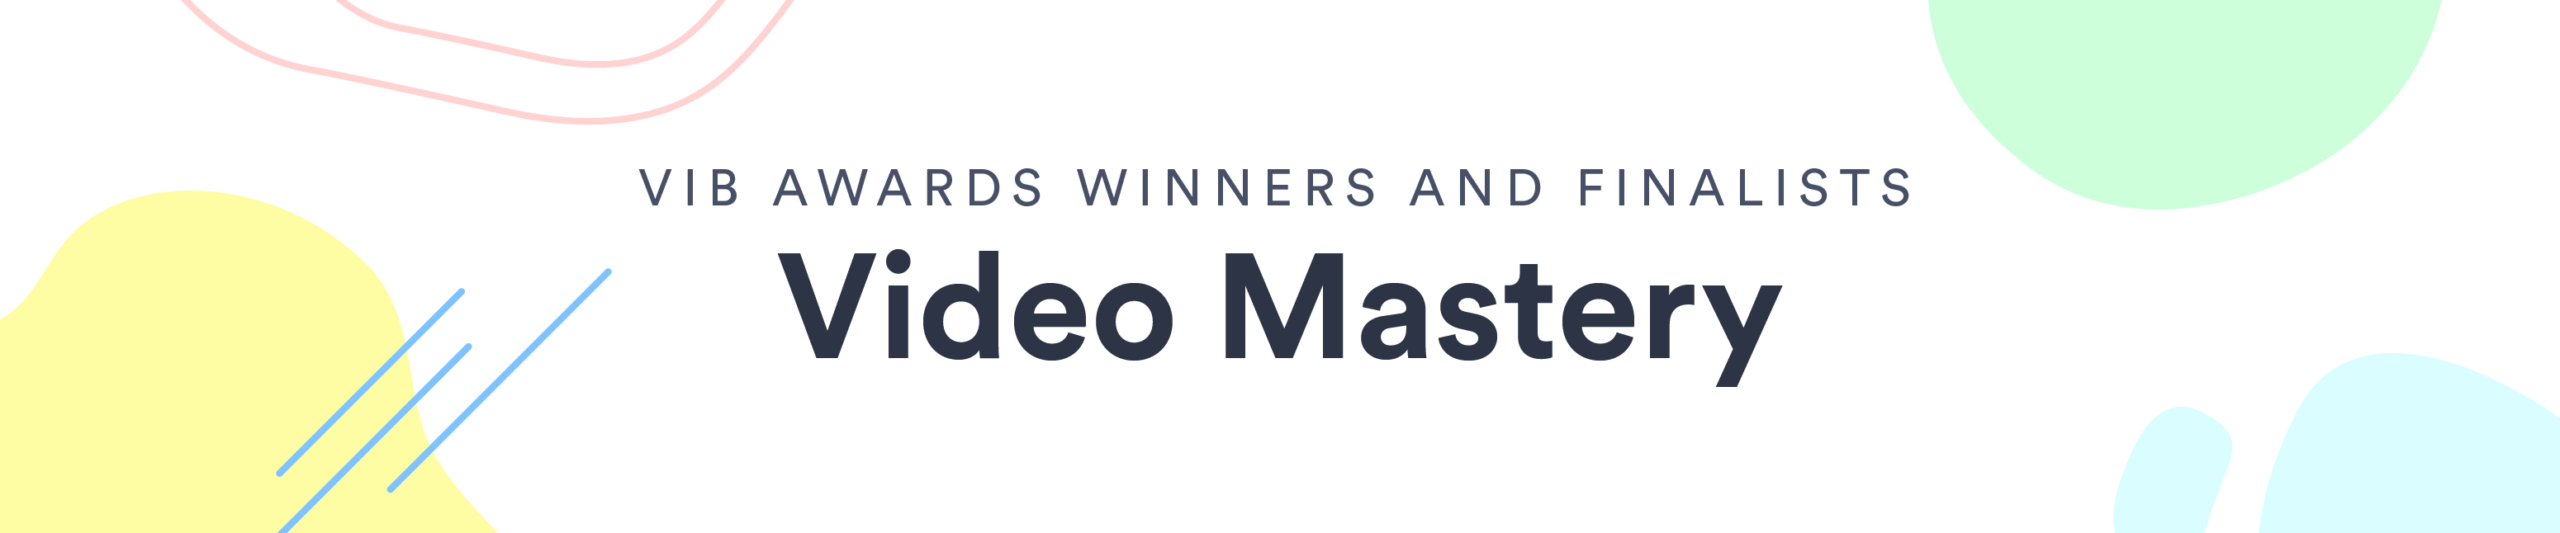 Video in Business Awards: Video Mastery Winners and Finalists